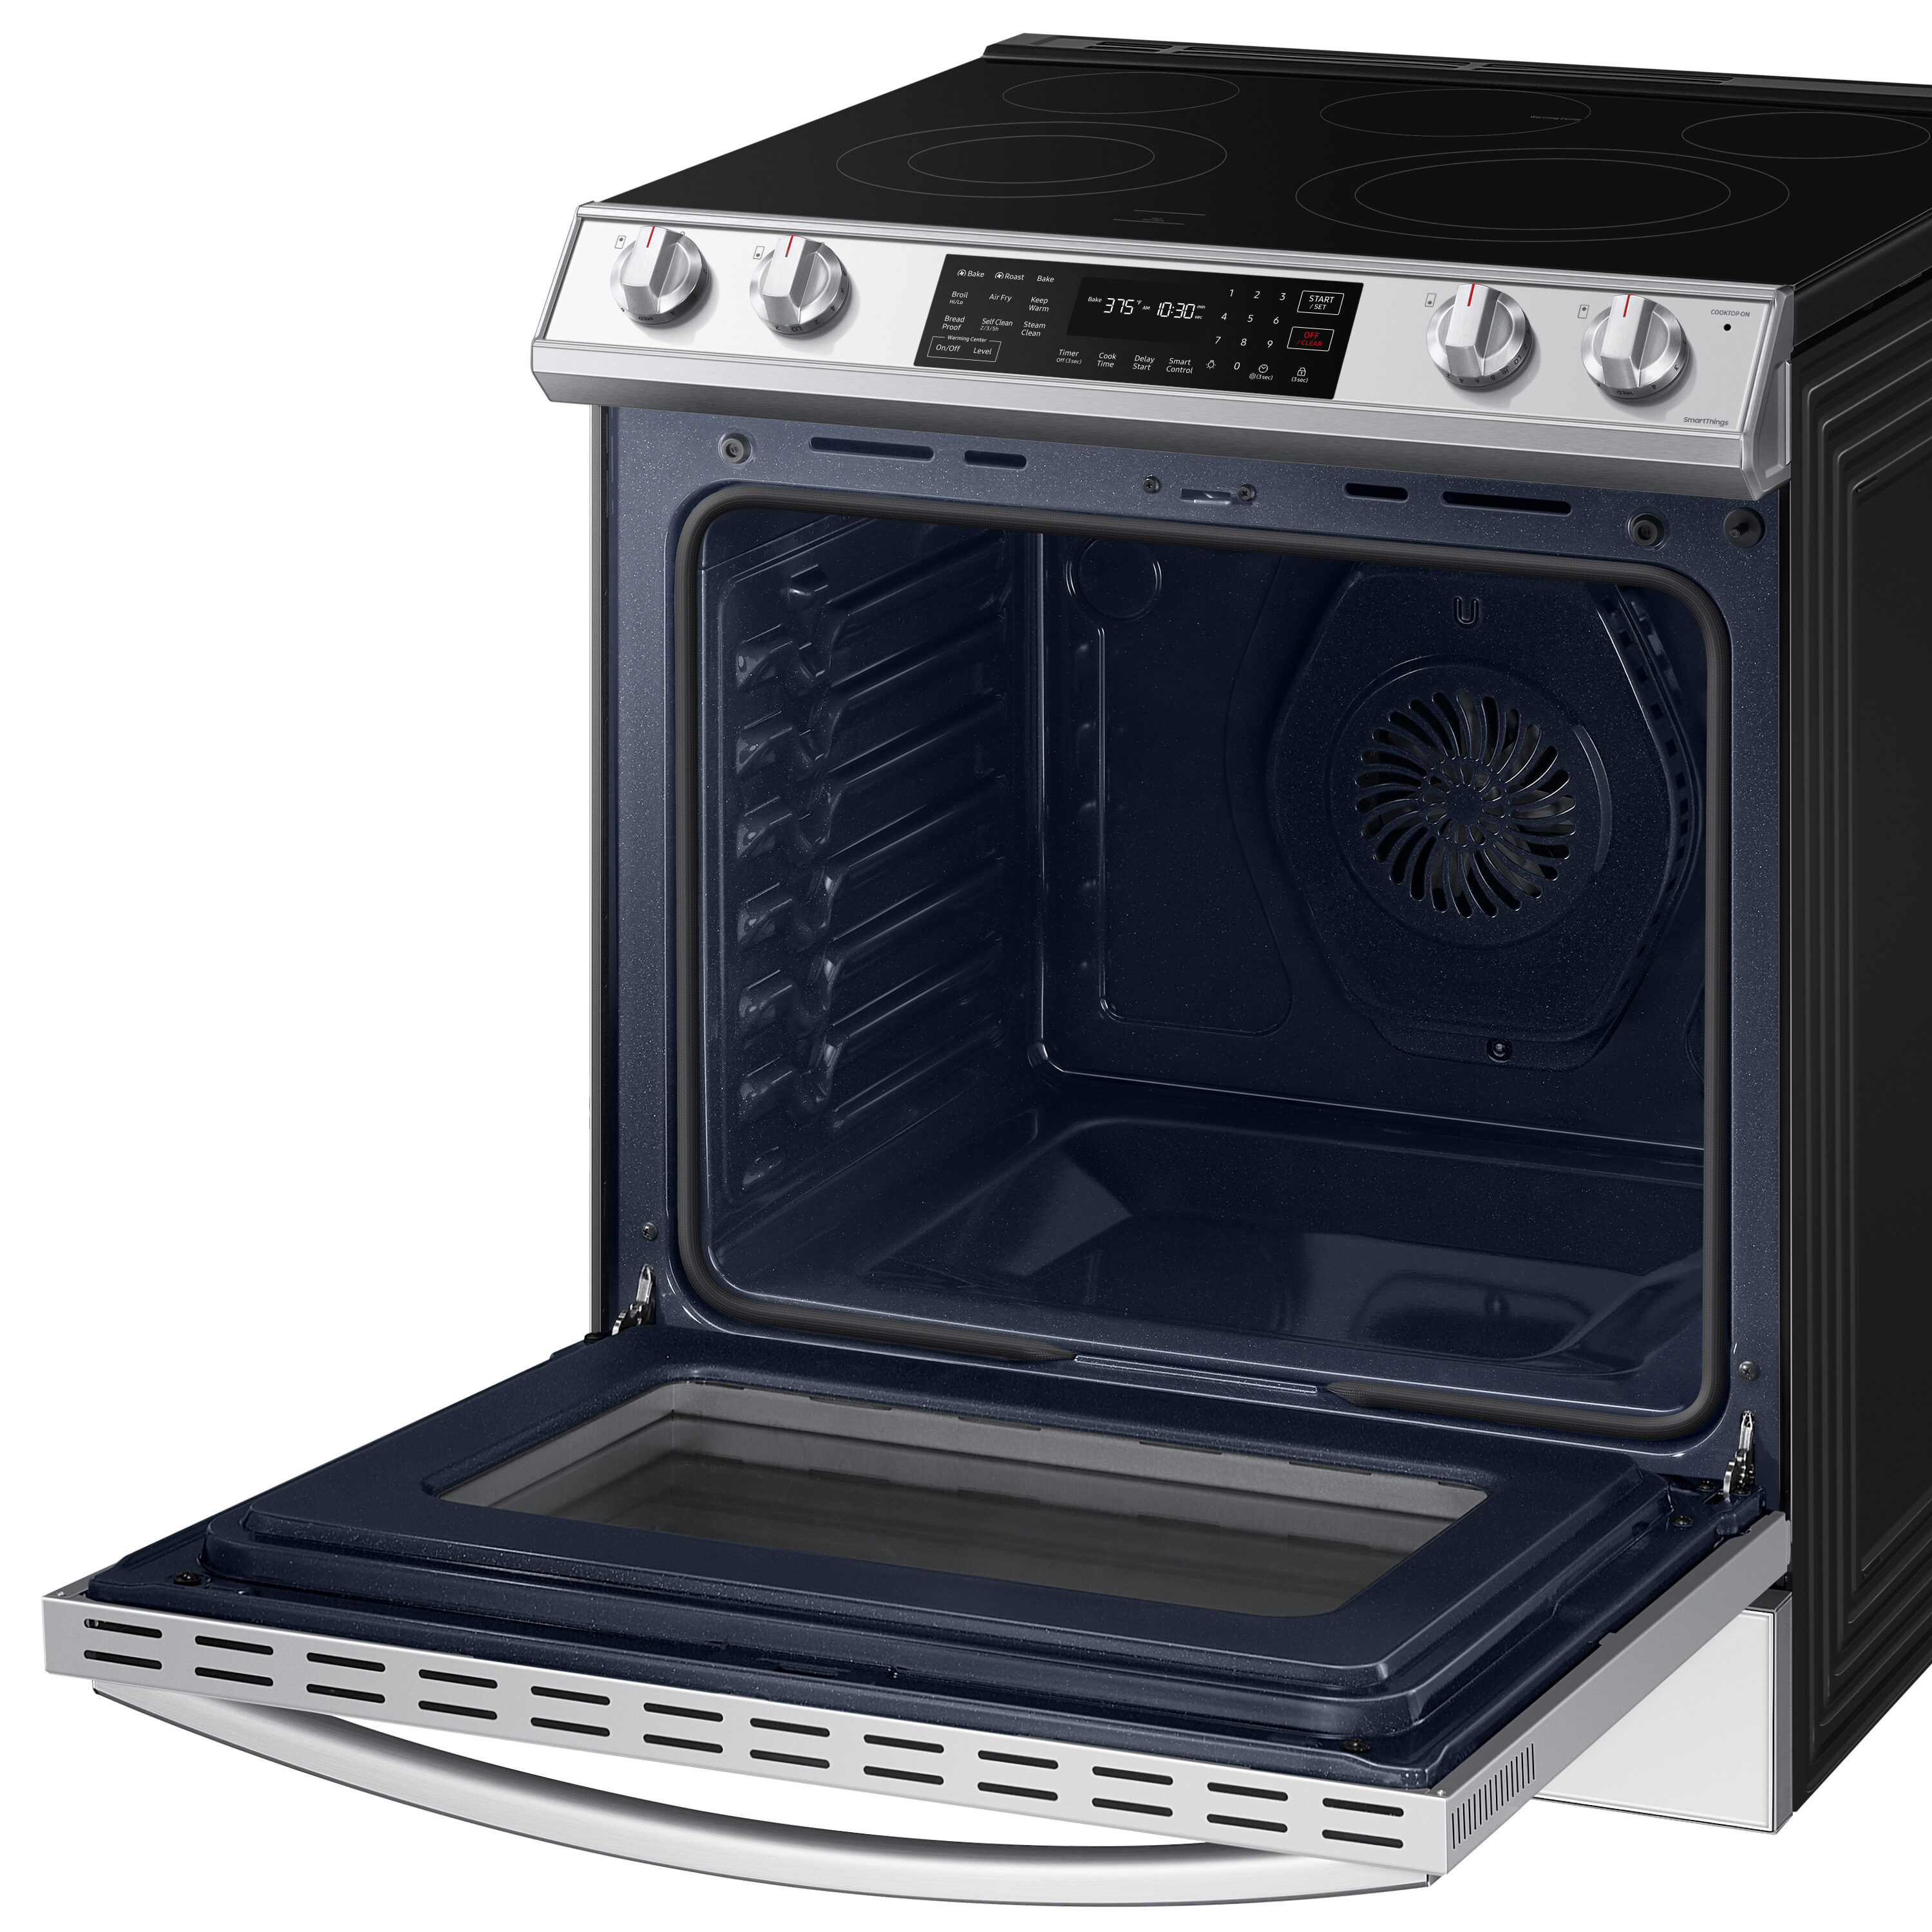 Samsung Convection Oven: Why You Should Try Cooking with One, Pearls  Furniture & Mattress